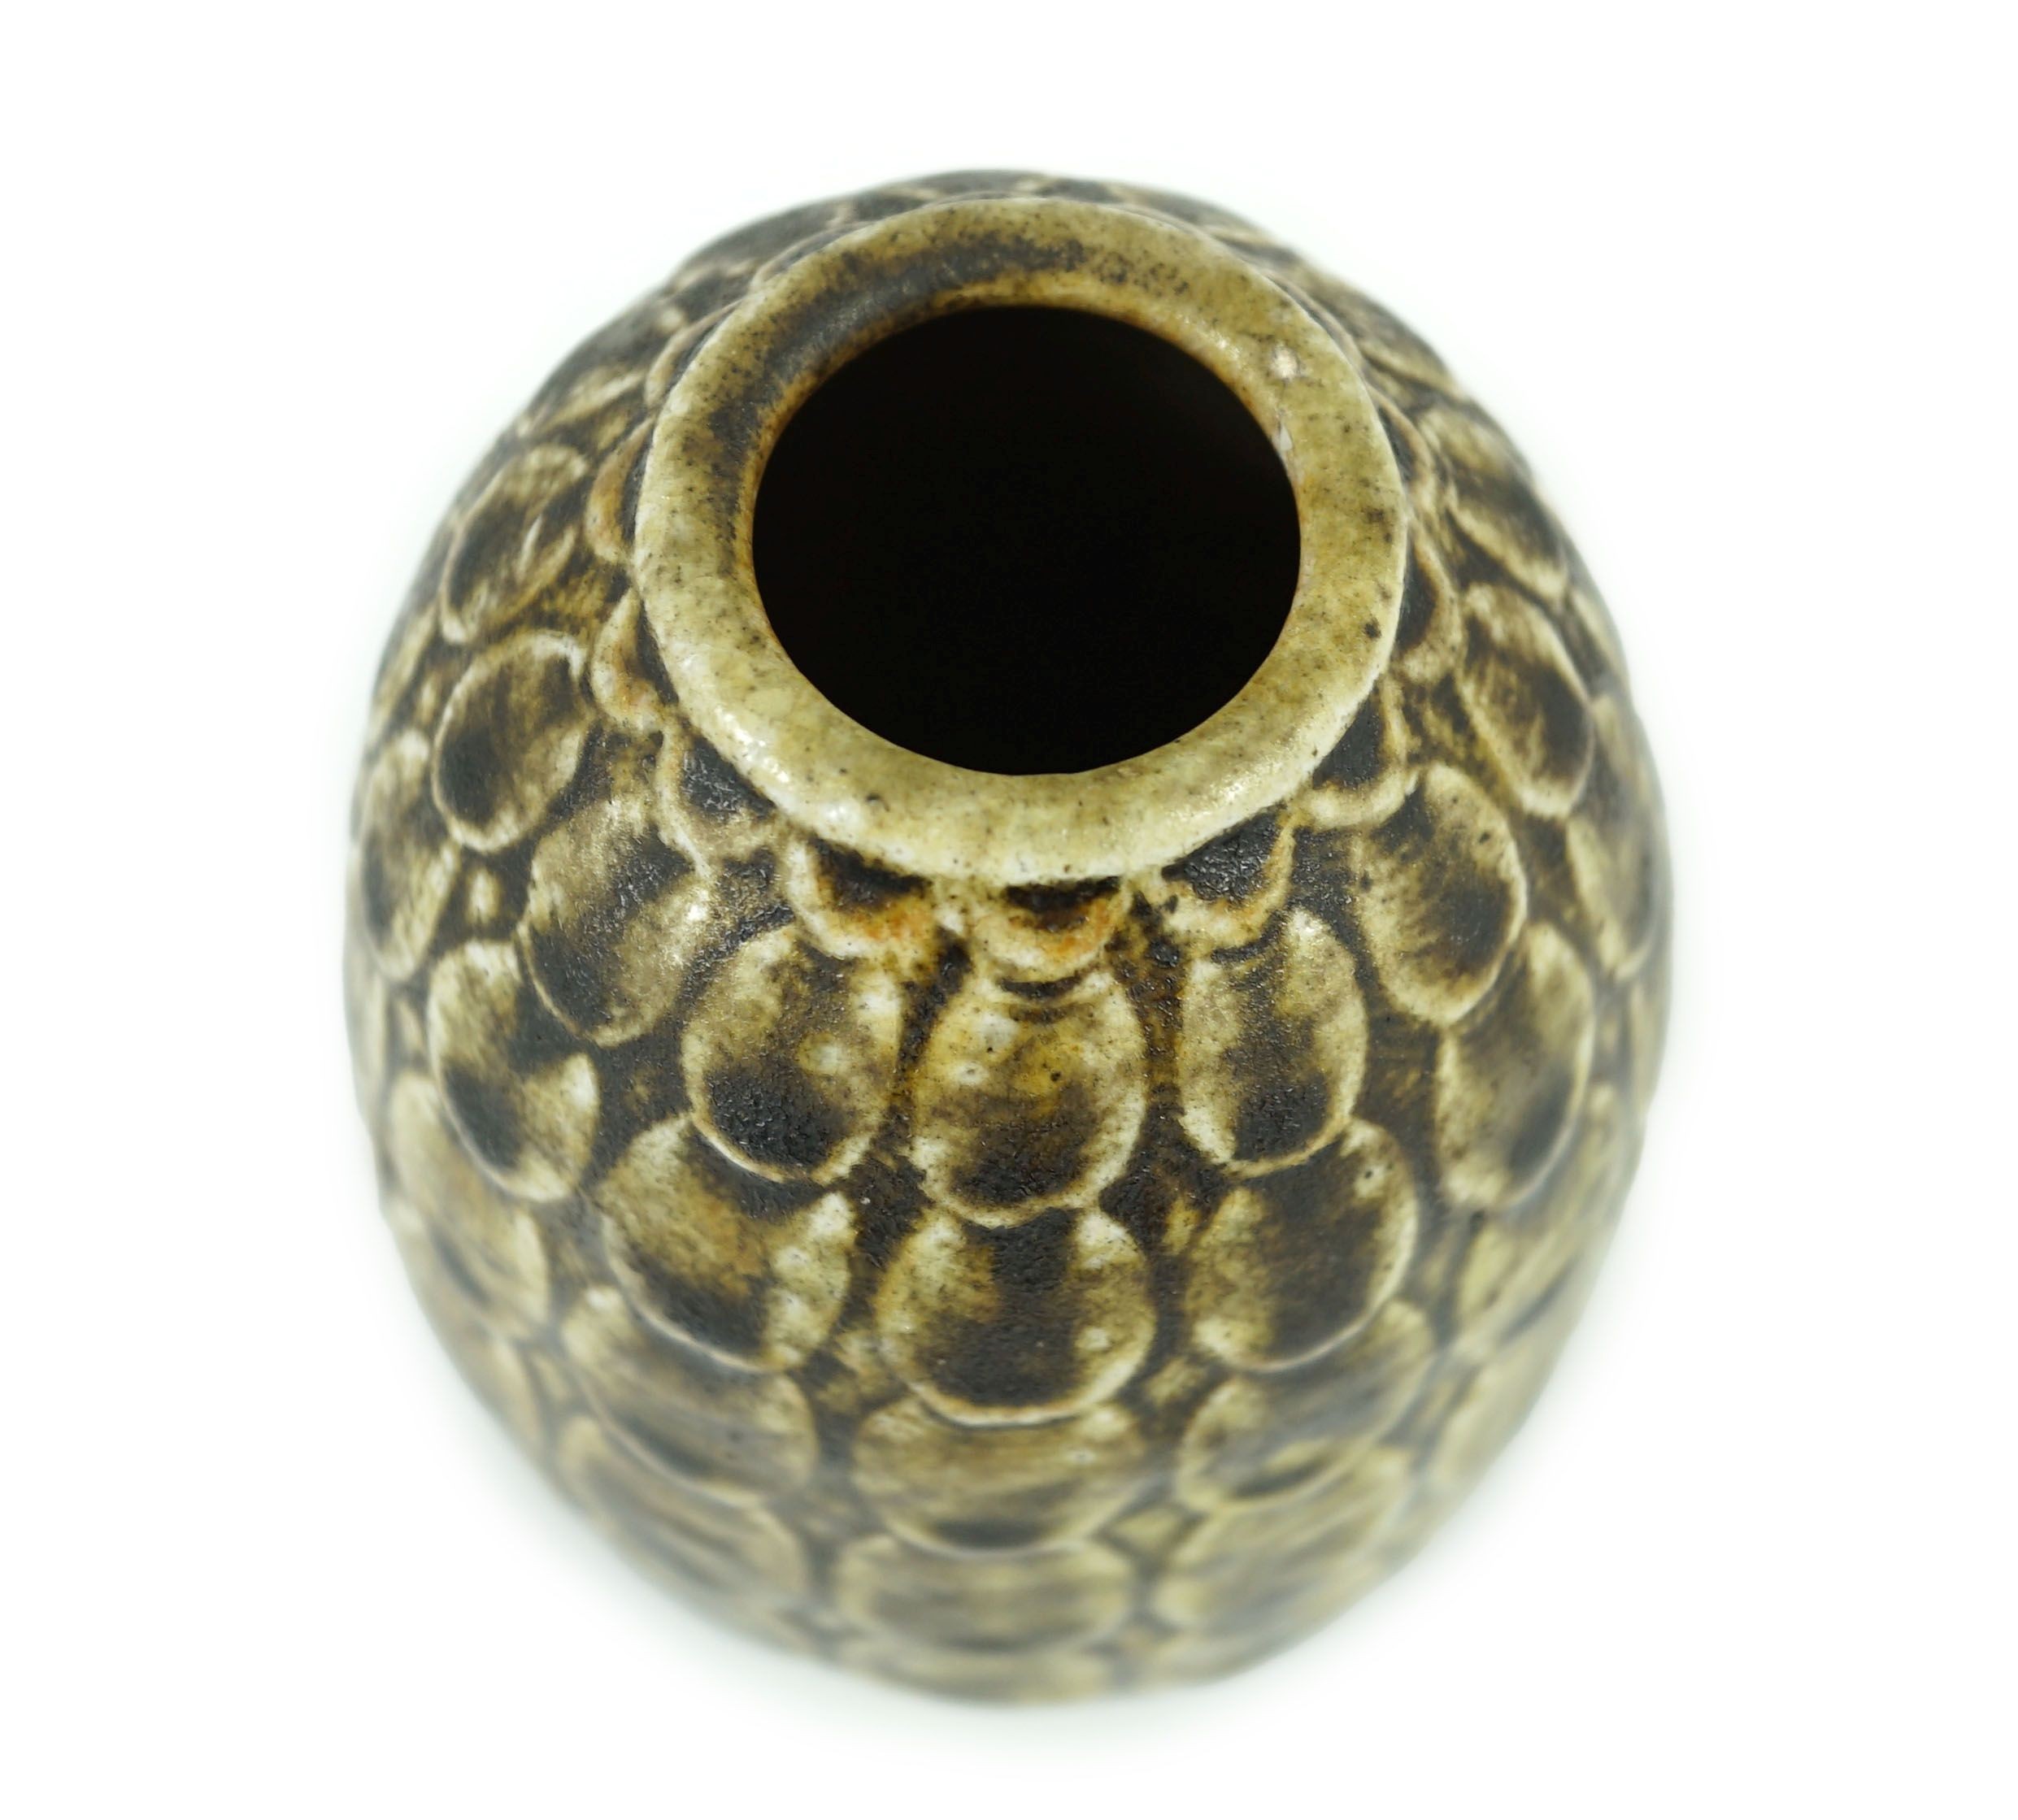 A Martin Brothers scale pattern ovoid small vase, dated 1910, 13.5 cm high